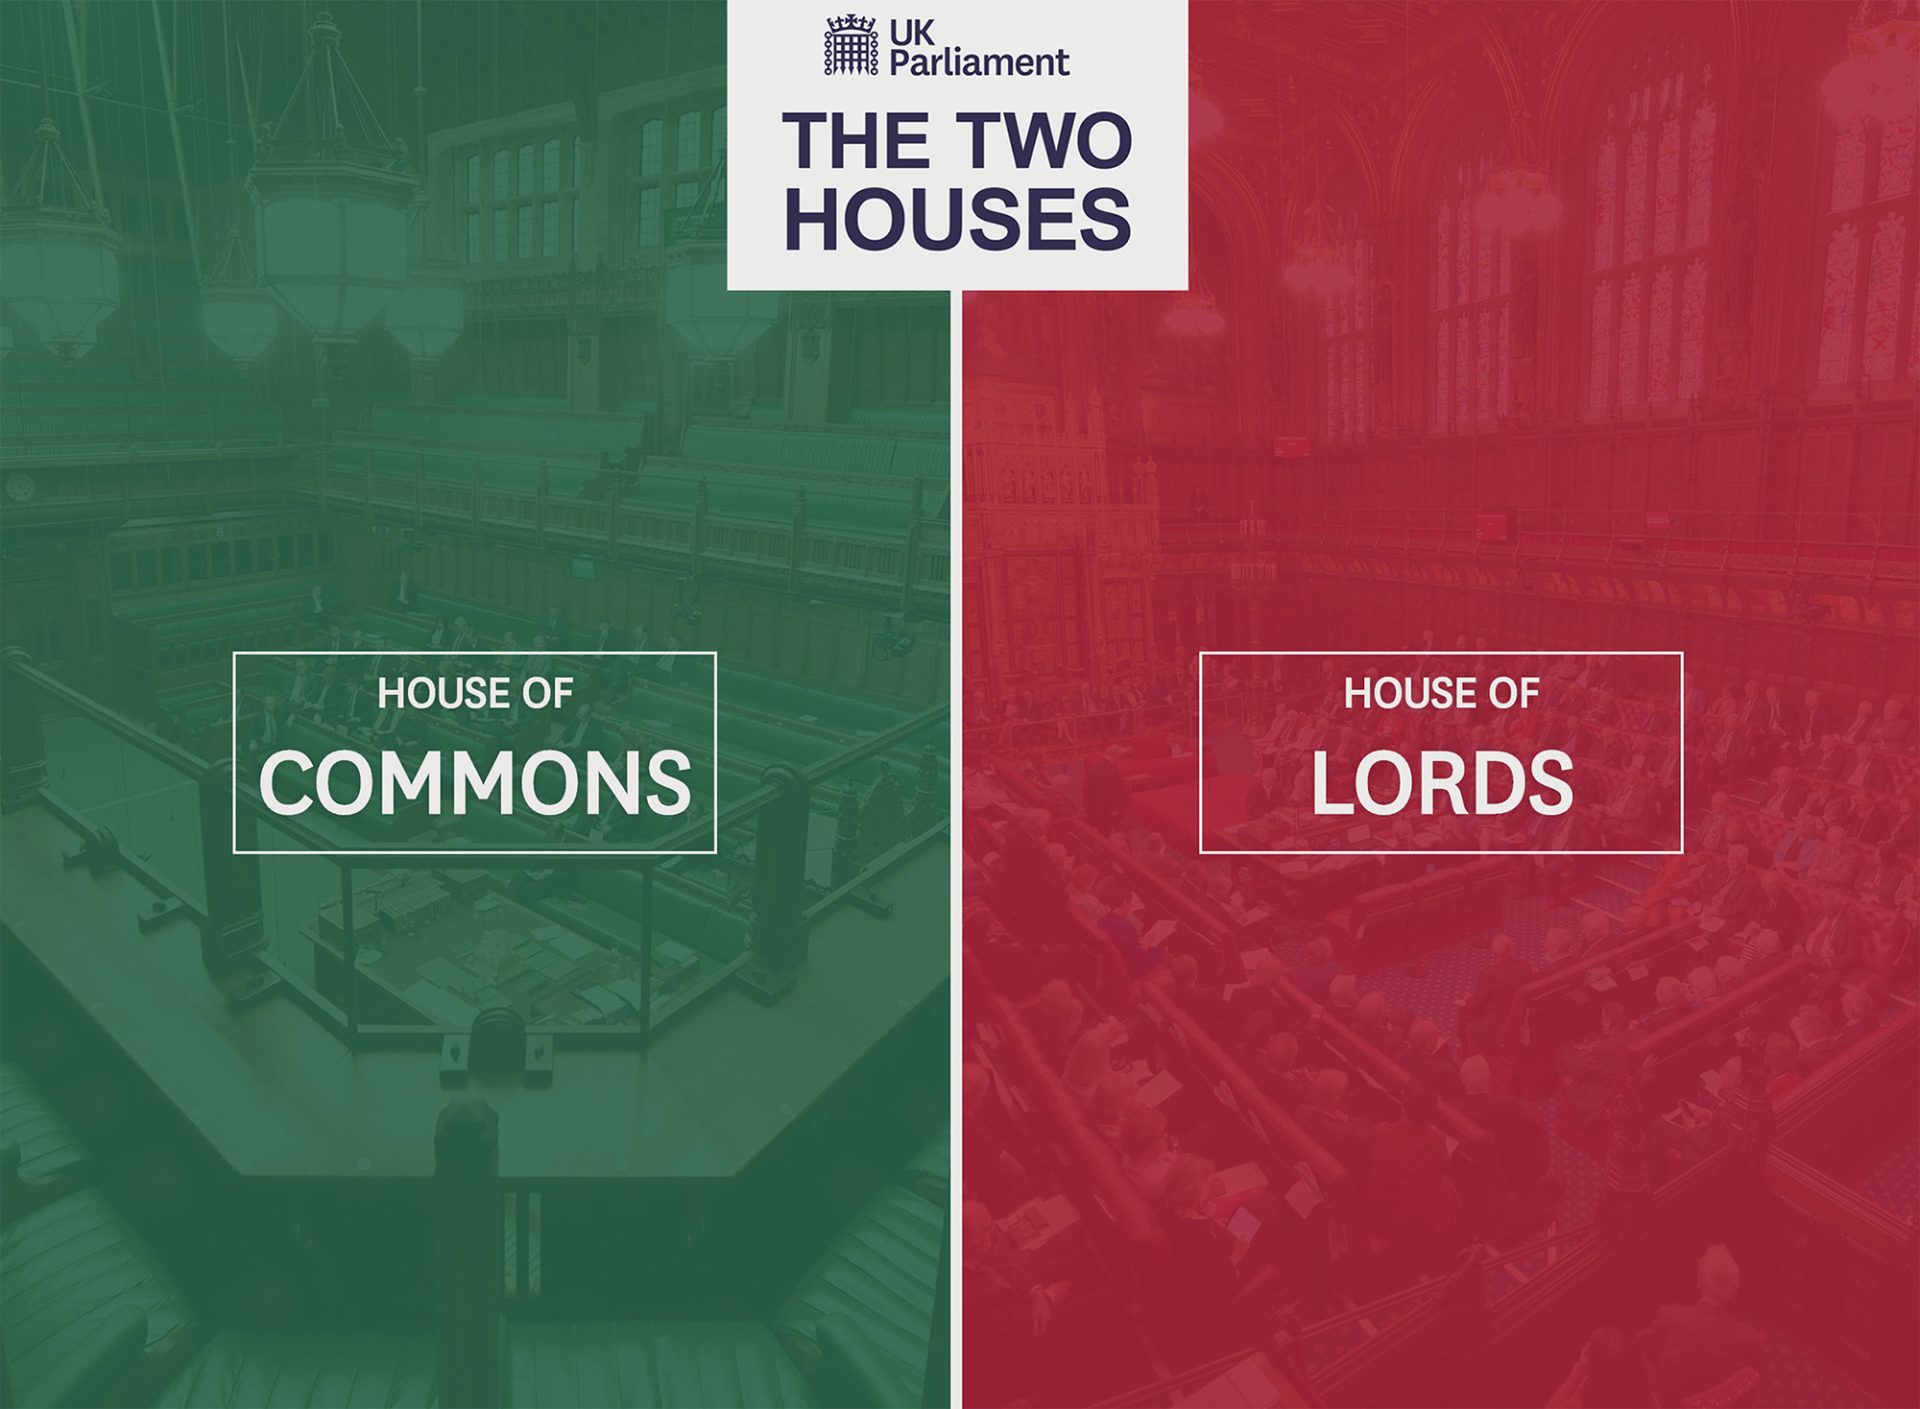 Houses of parliament virtual learning